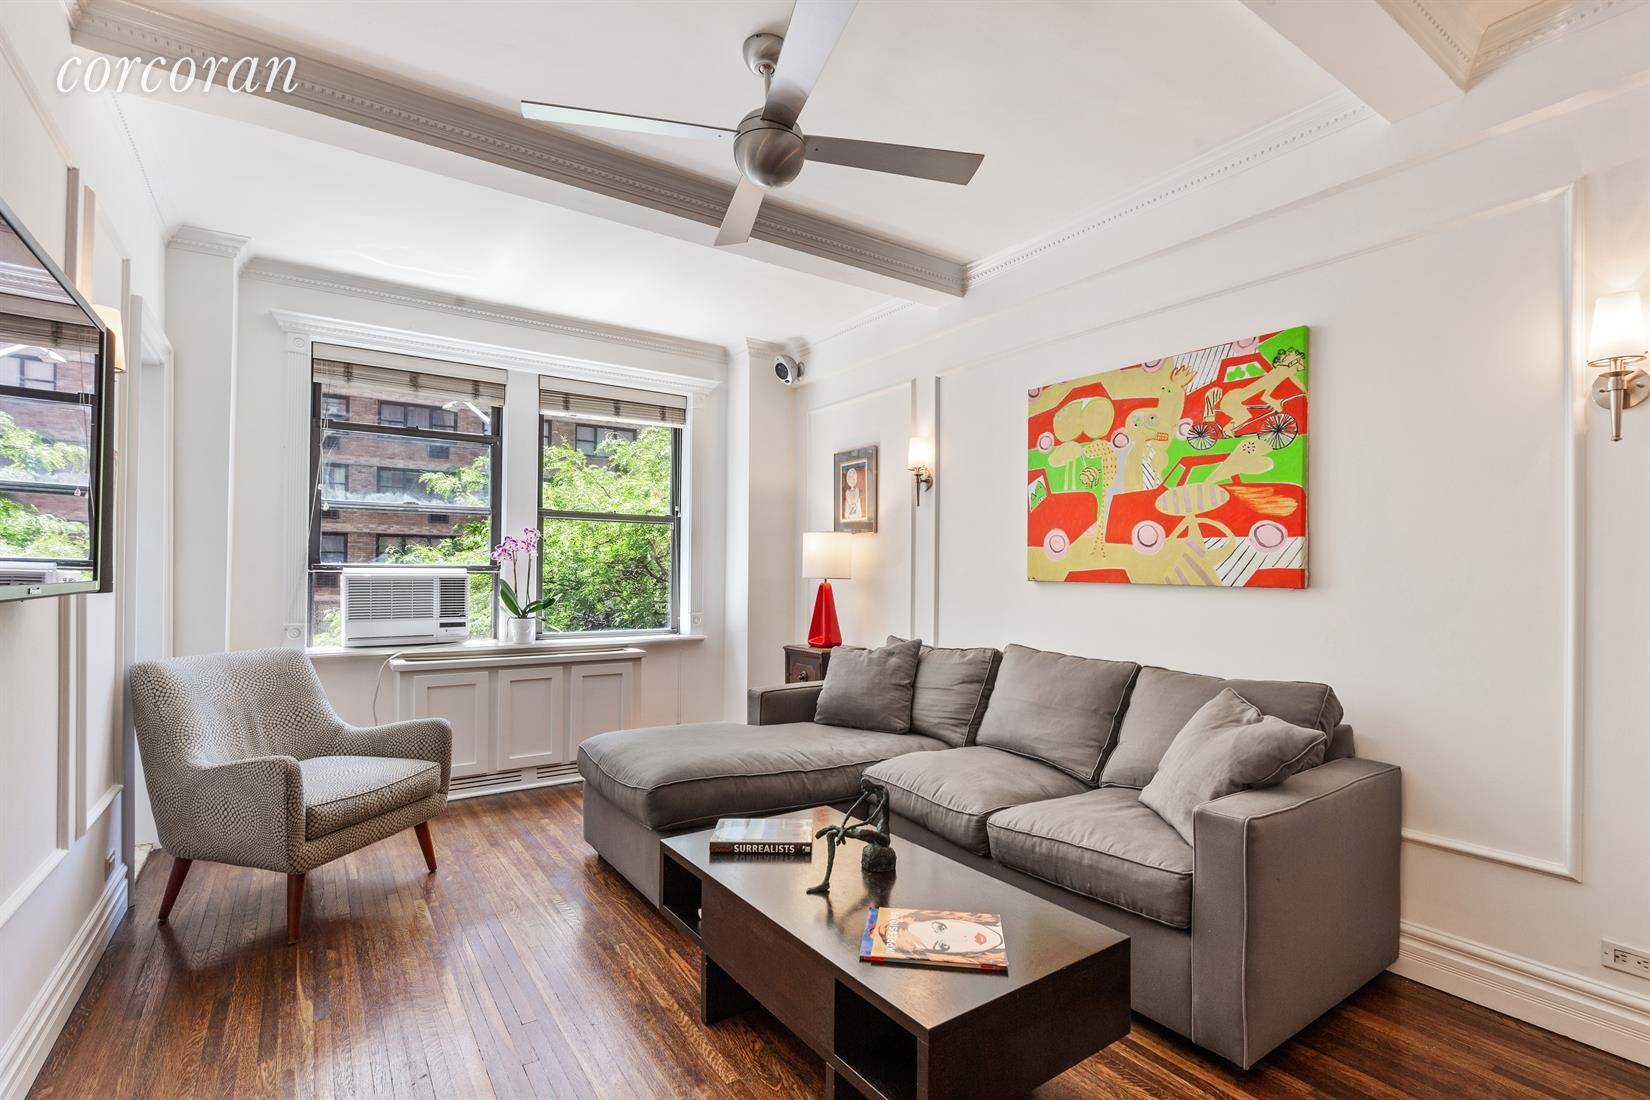 457 West 57th Street Apt 306 is a sunny spacious 1 bed 1 bath home filled with Prewar charm.